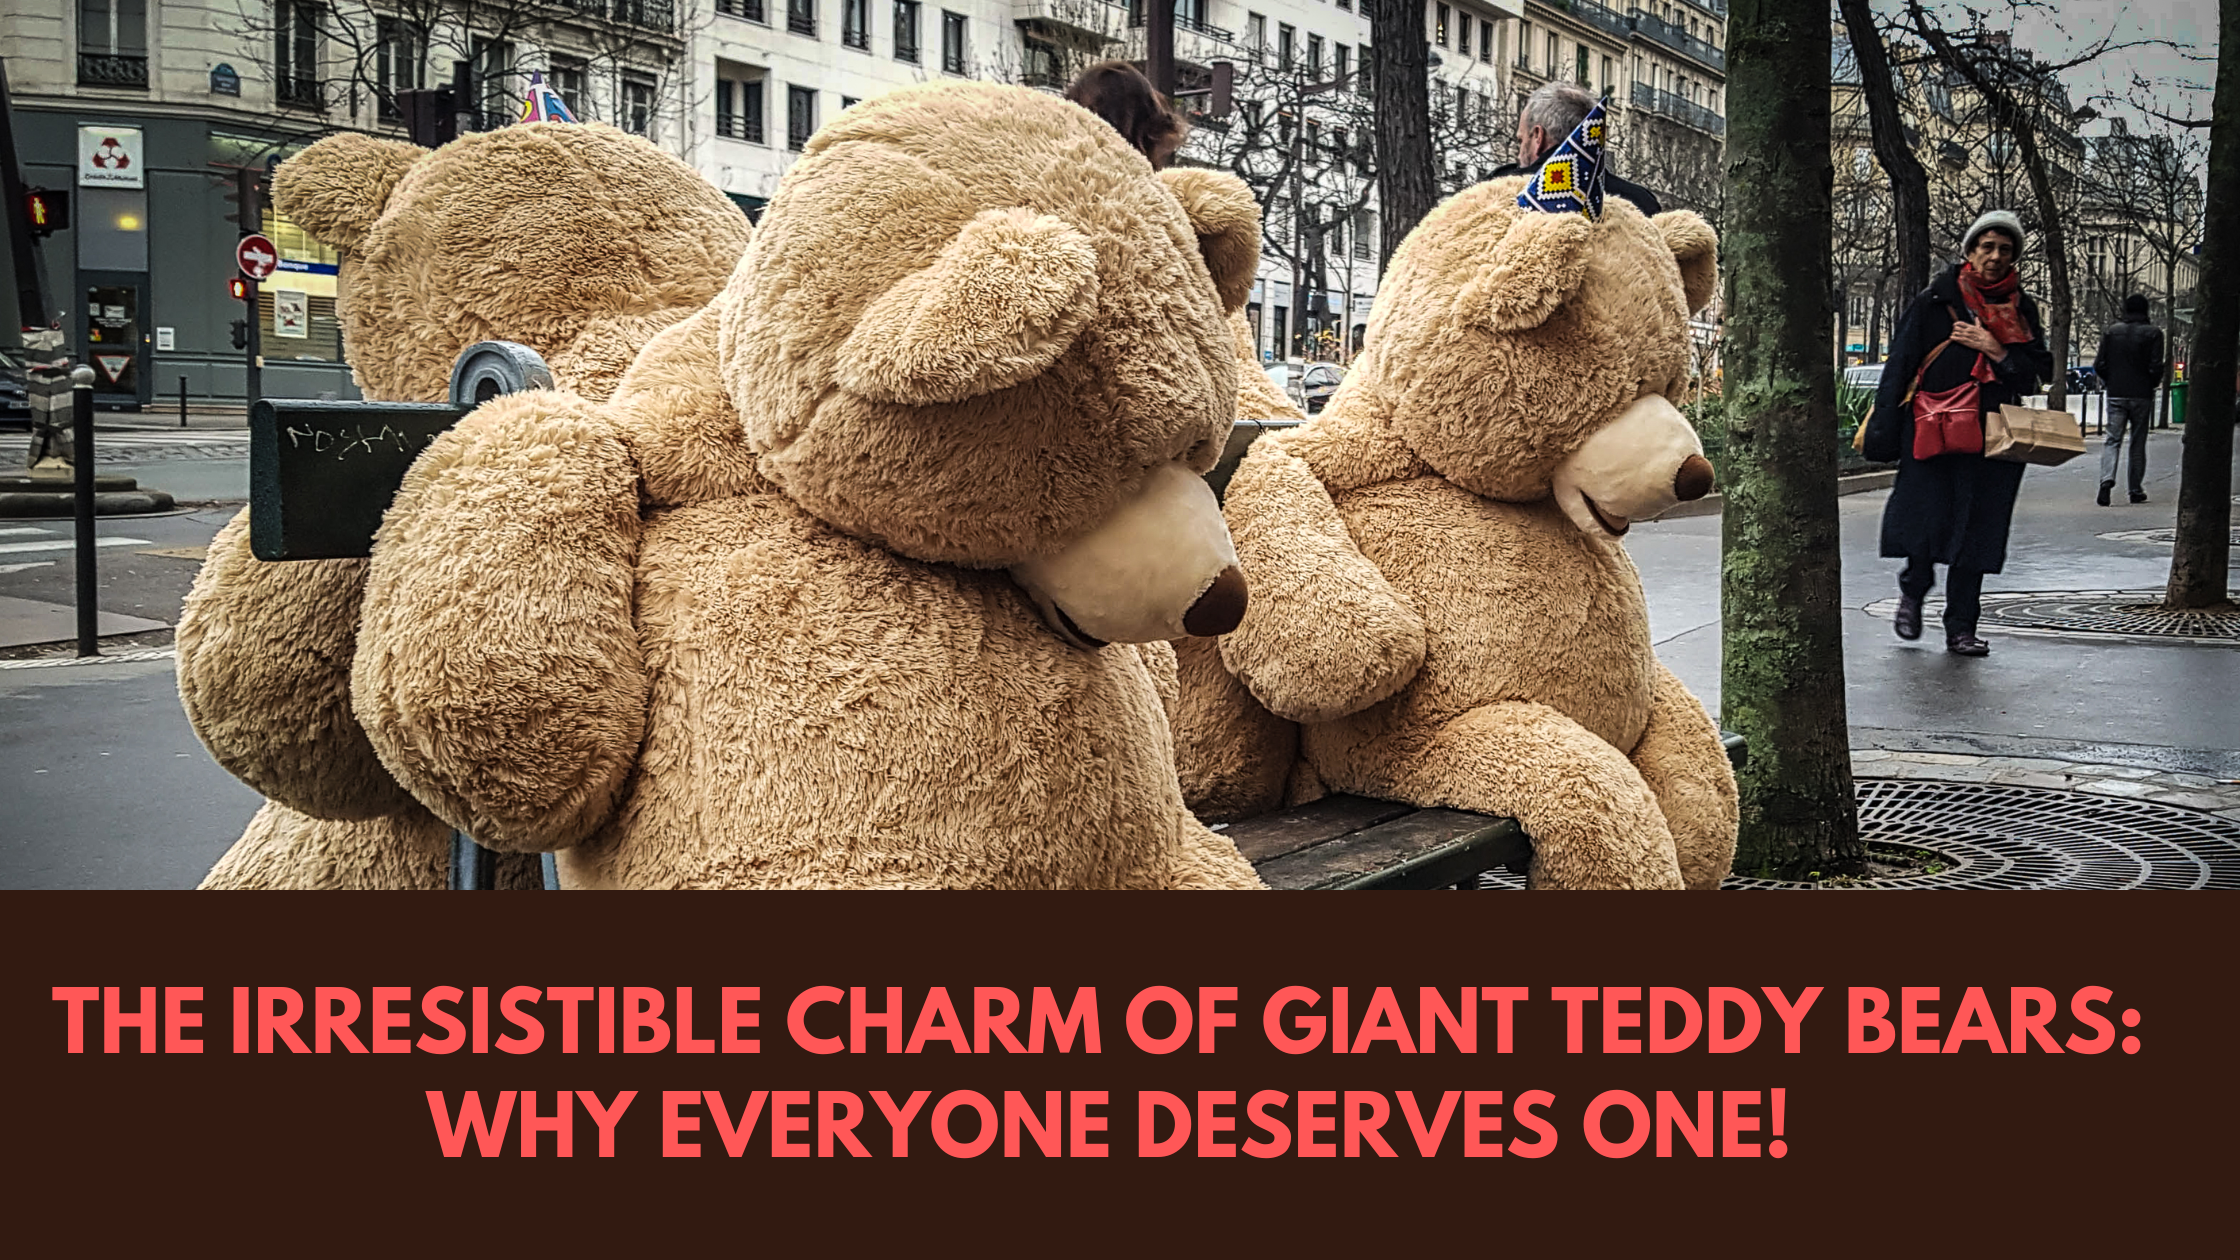 The Irresistible Charm of Giant Teddy Bears: Why Everyone Deserves One!